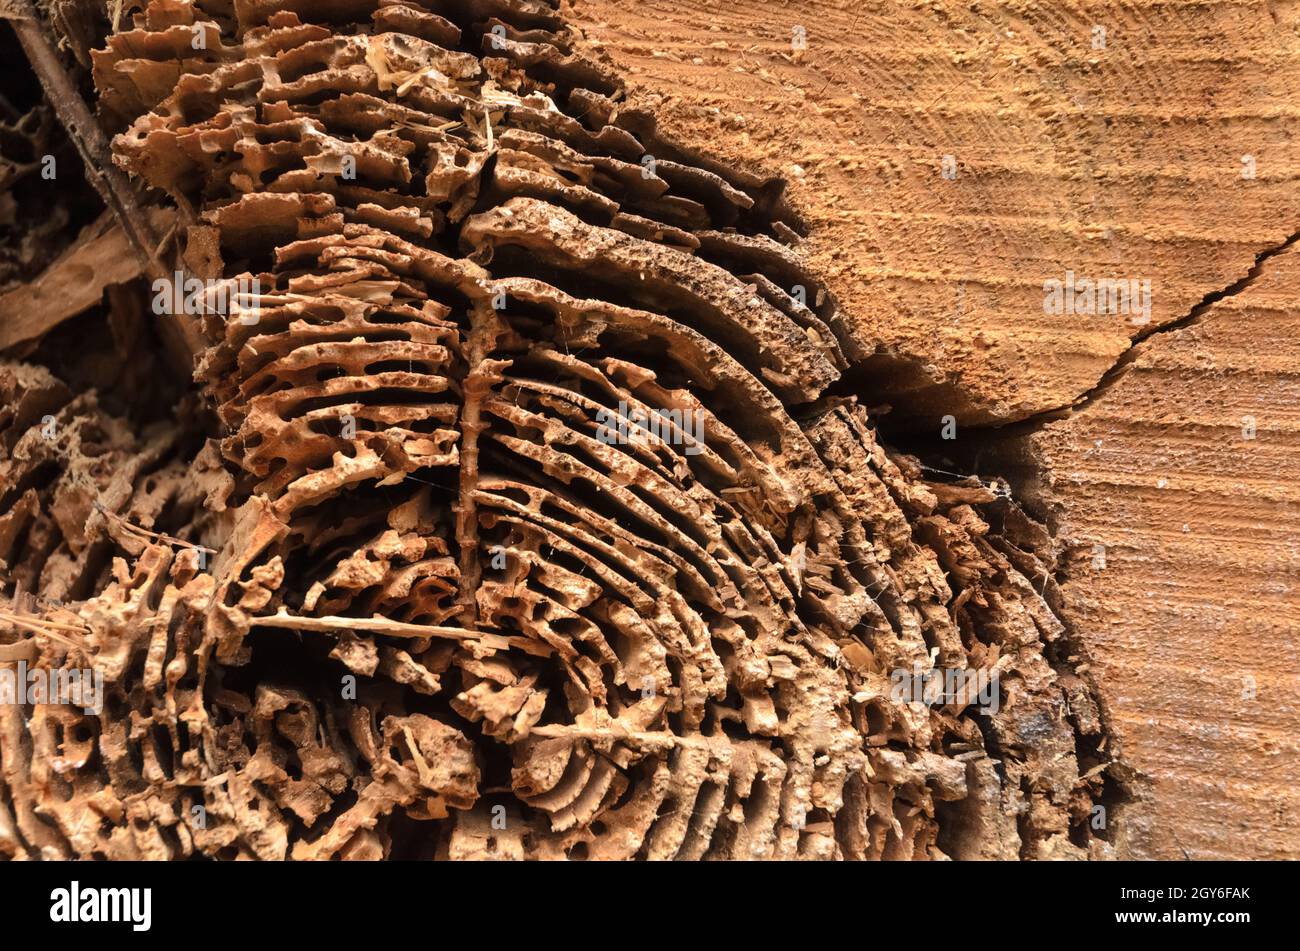 Close-up view and cross-section of growth rings of a felled tree with damaged area, wooden natural background Stock Photo